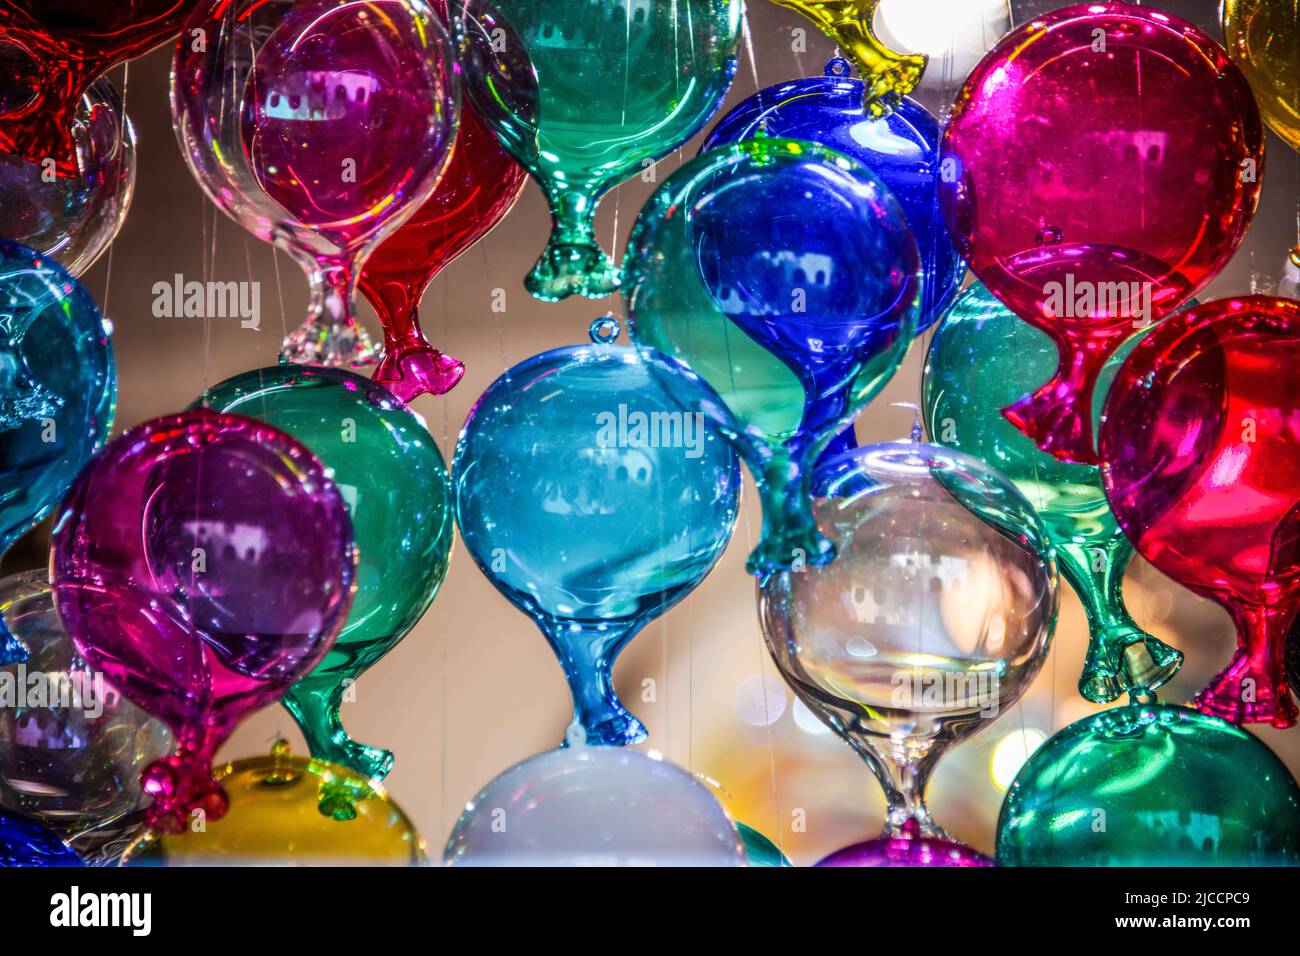 Many glass-balloons in various colors hanging from the ceiling Stock Photo